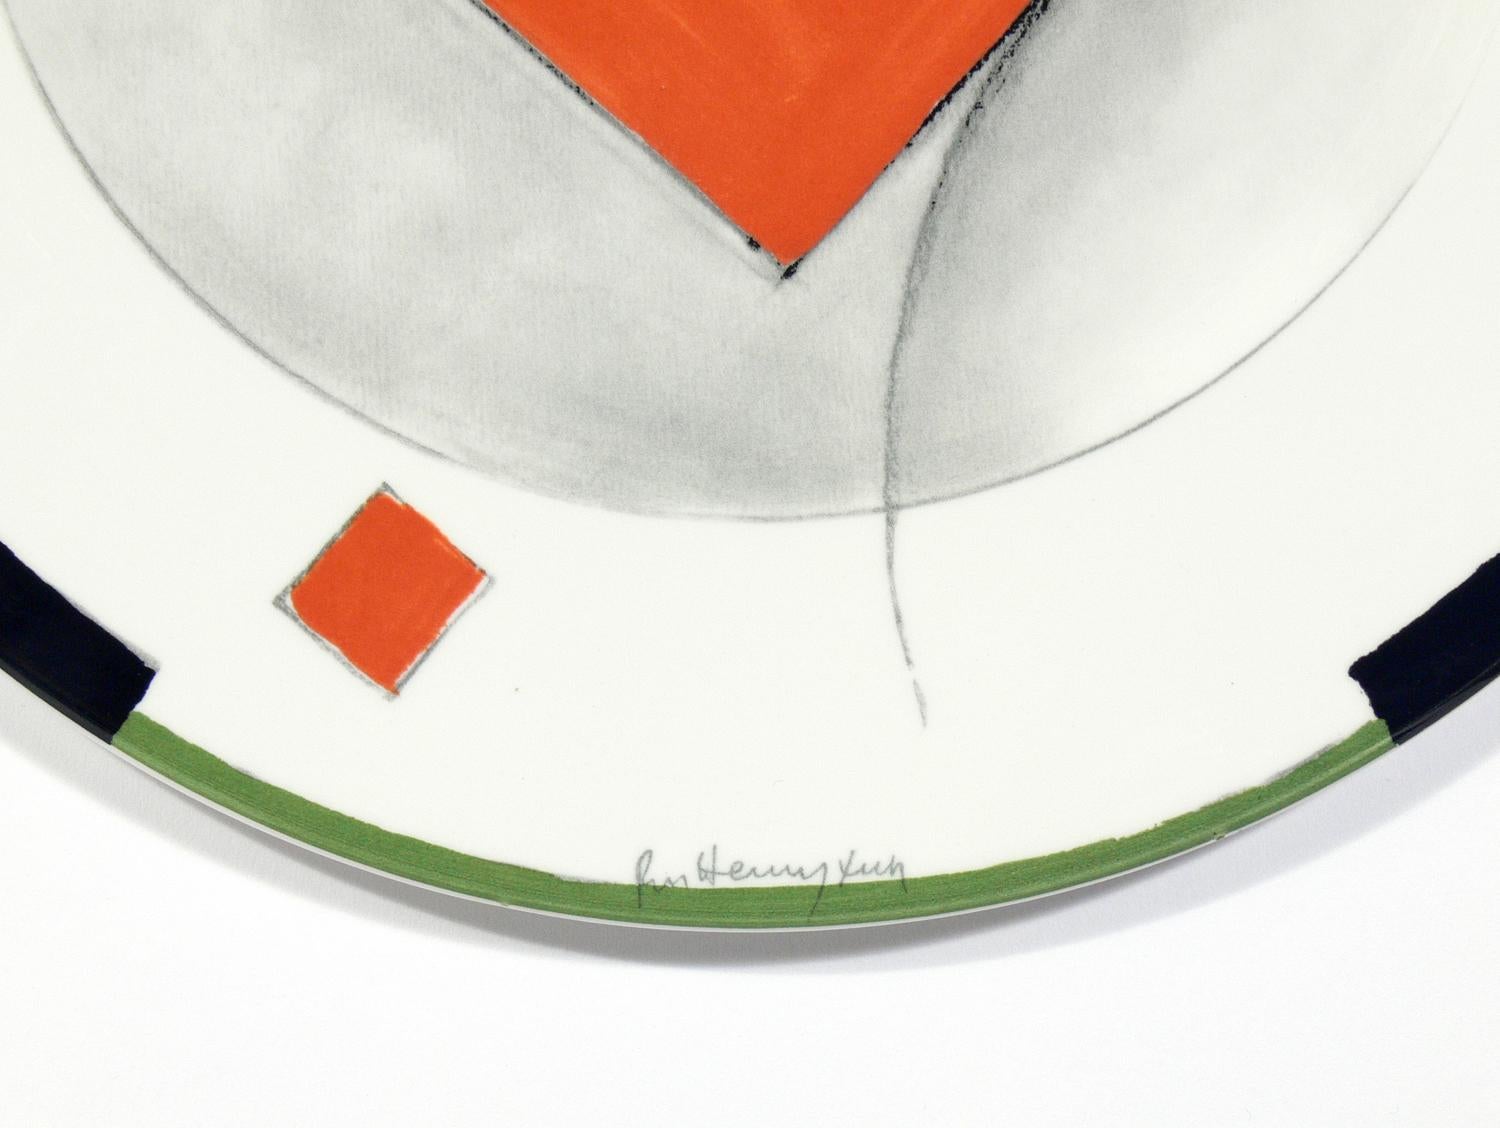 Luxembourgish Pair of Russian Constructivist Plates by Wladimir Njemuchin for Villeroy & Boch